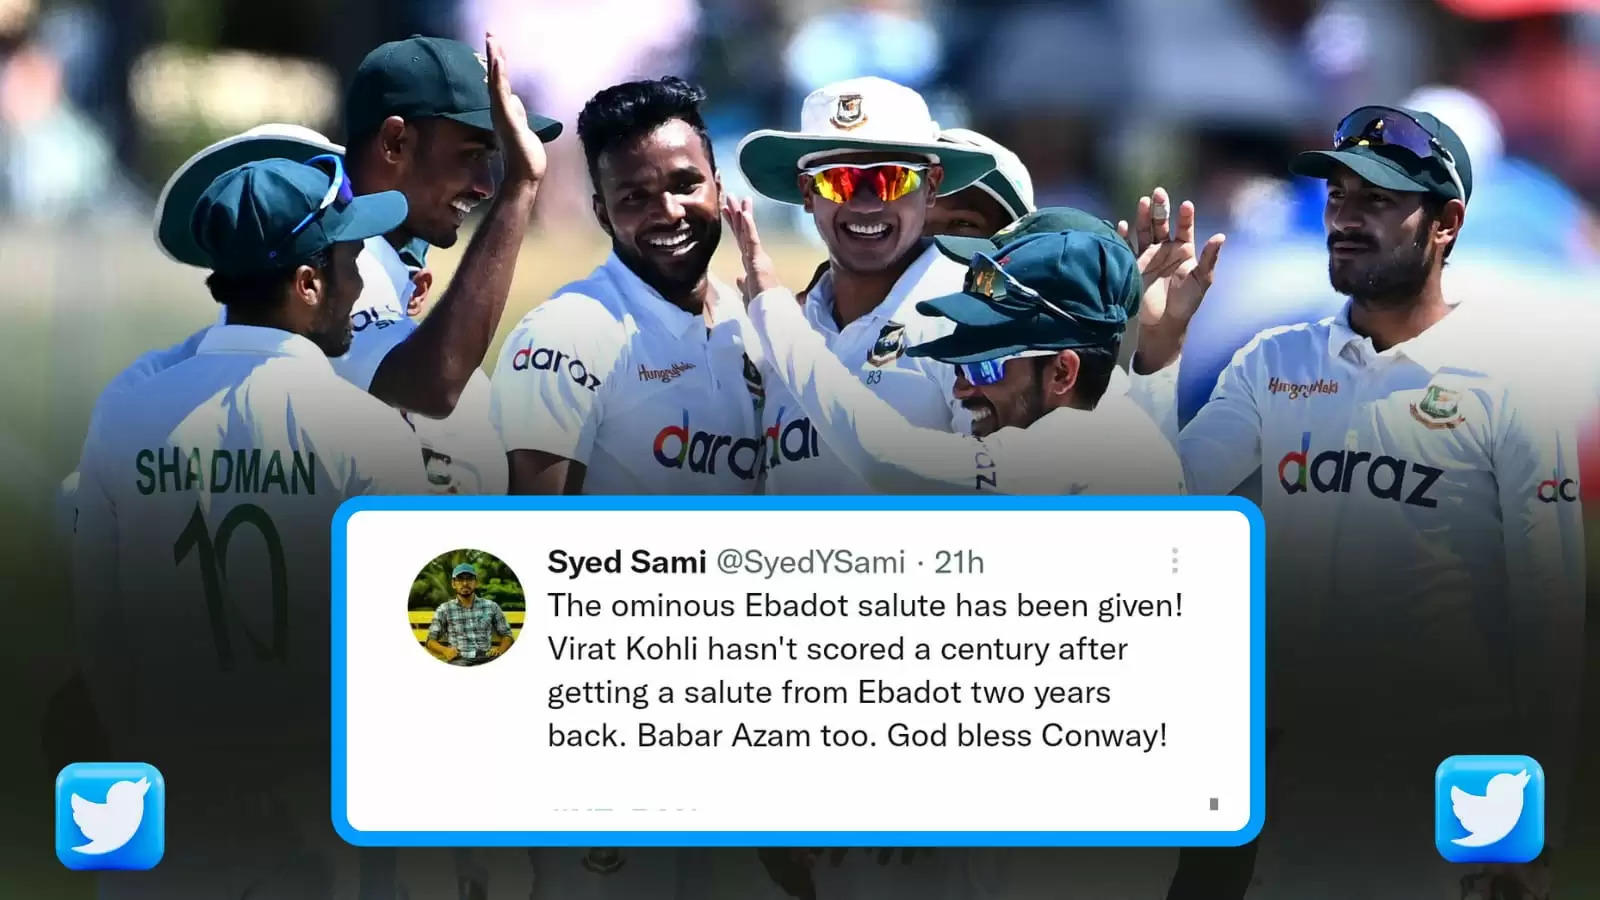 ‘Bring Bangladesh over to play the Ashes’ – Fans go gaga over Bangladesh’s historic Test win over New Zealand